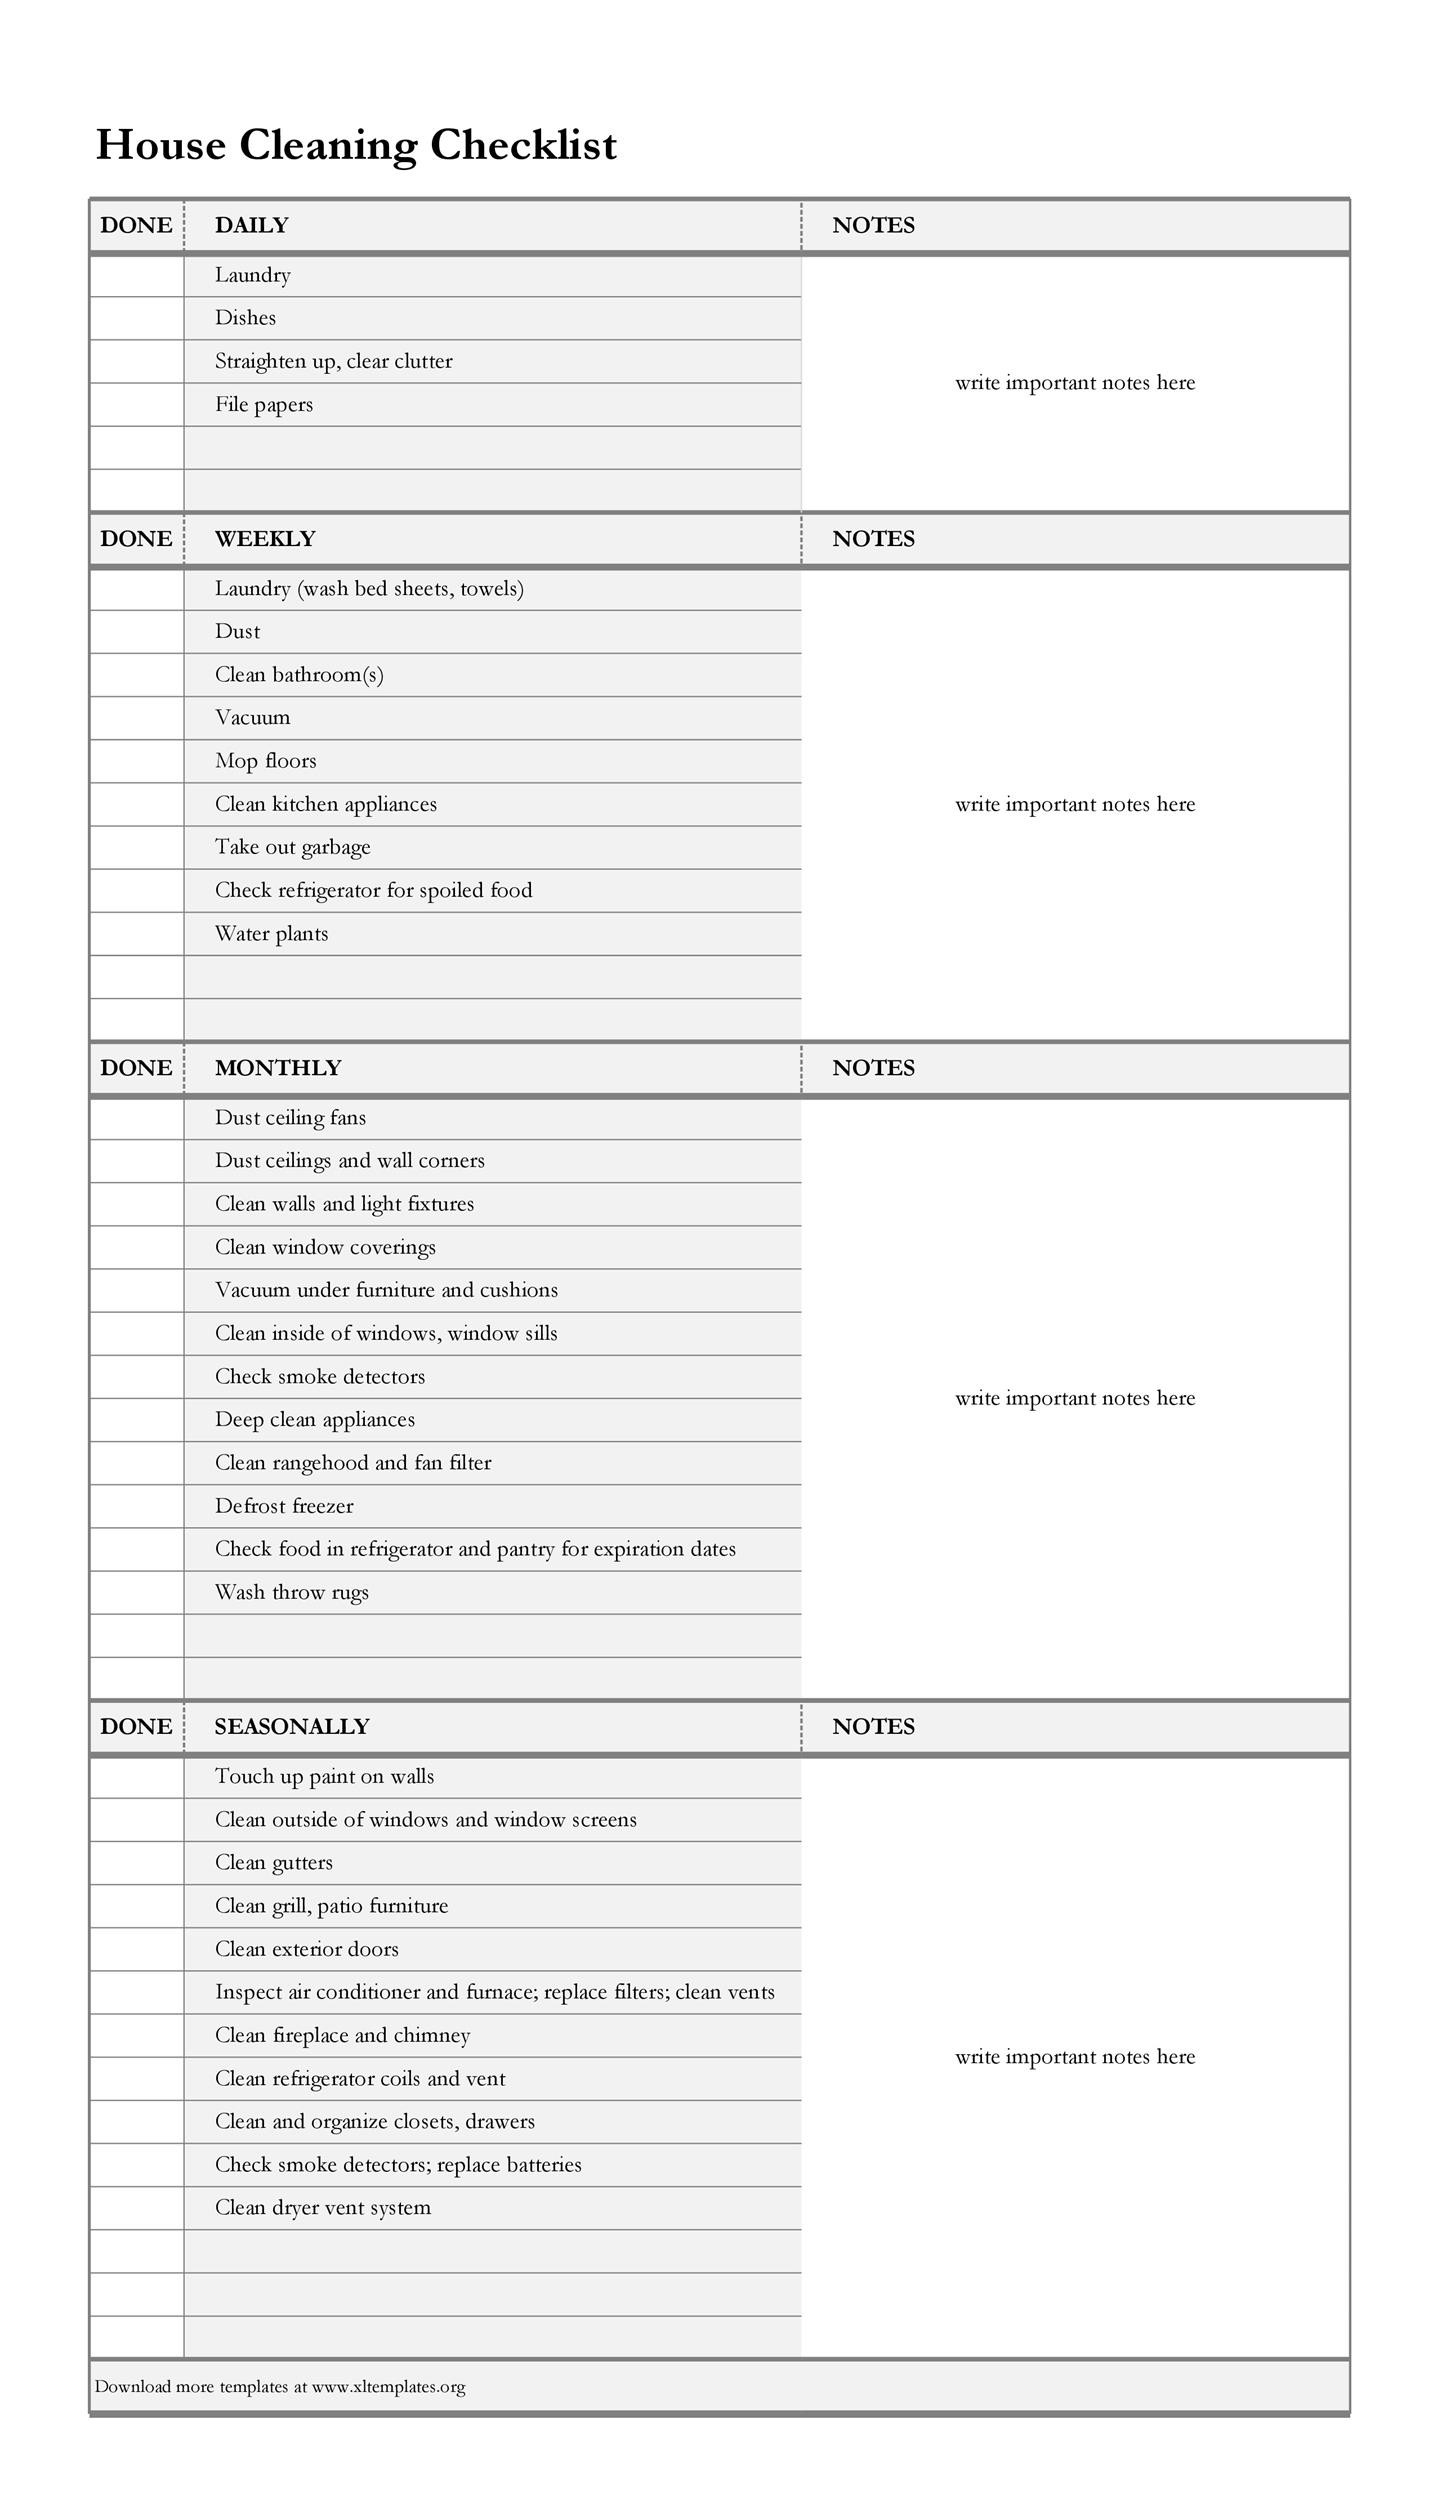 40 Printable House Cleaning Checklist Templates ᐅ Template Lab